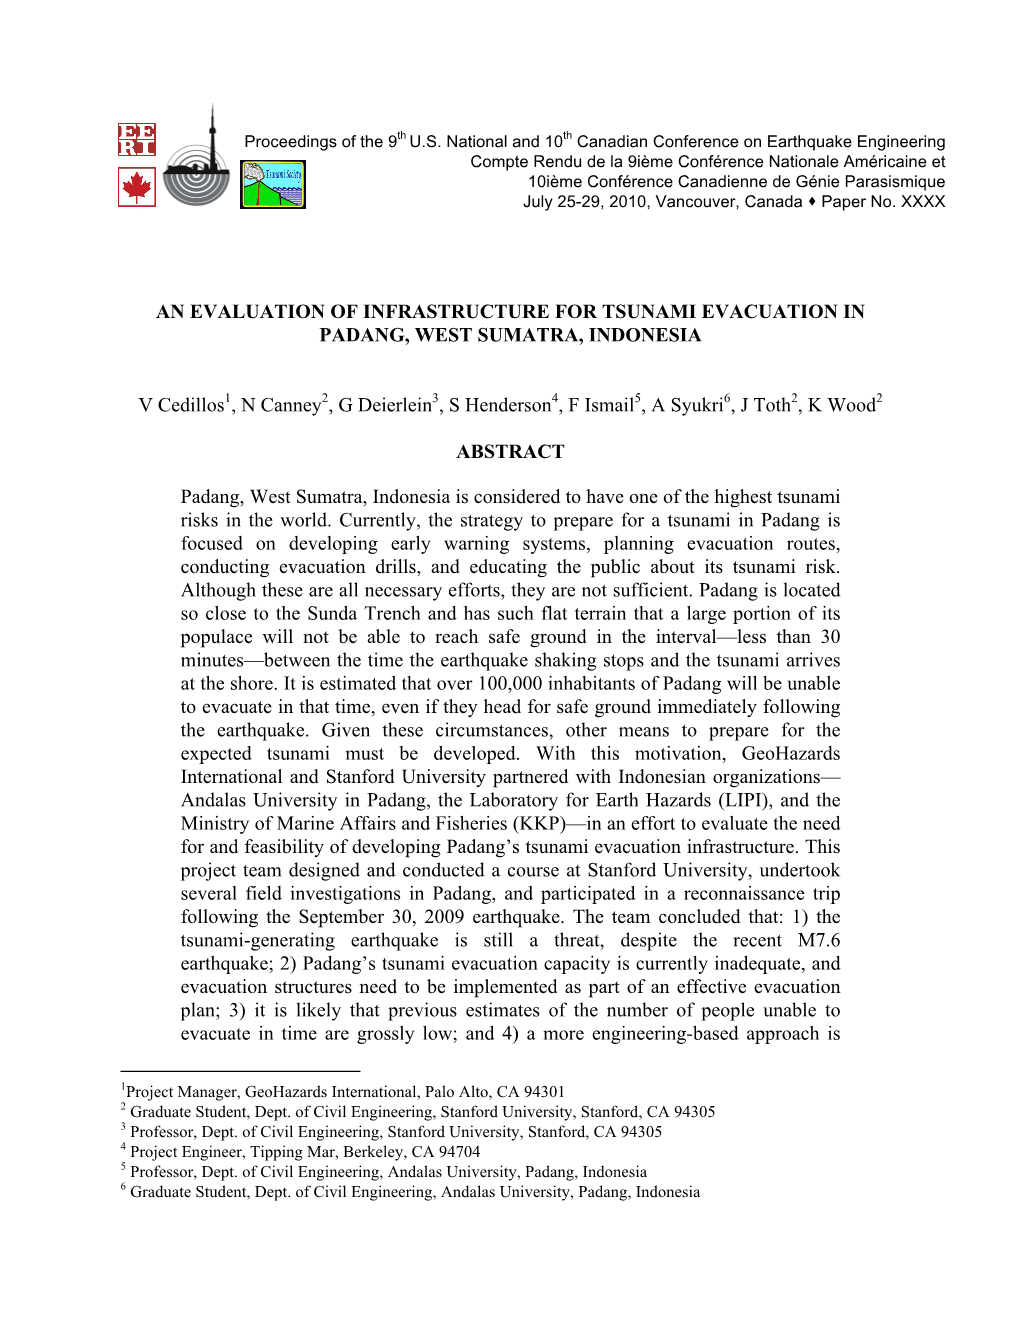 An Evaluation of Infrastructure for Tsunami Evacuation in Padang, West Sumatra, Indonesia